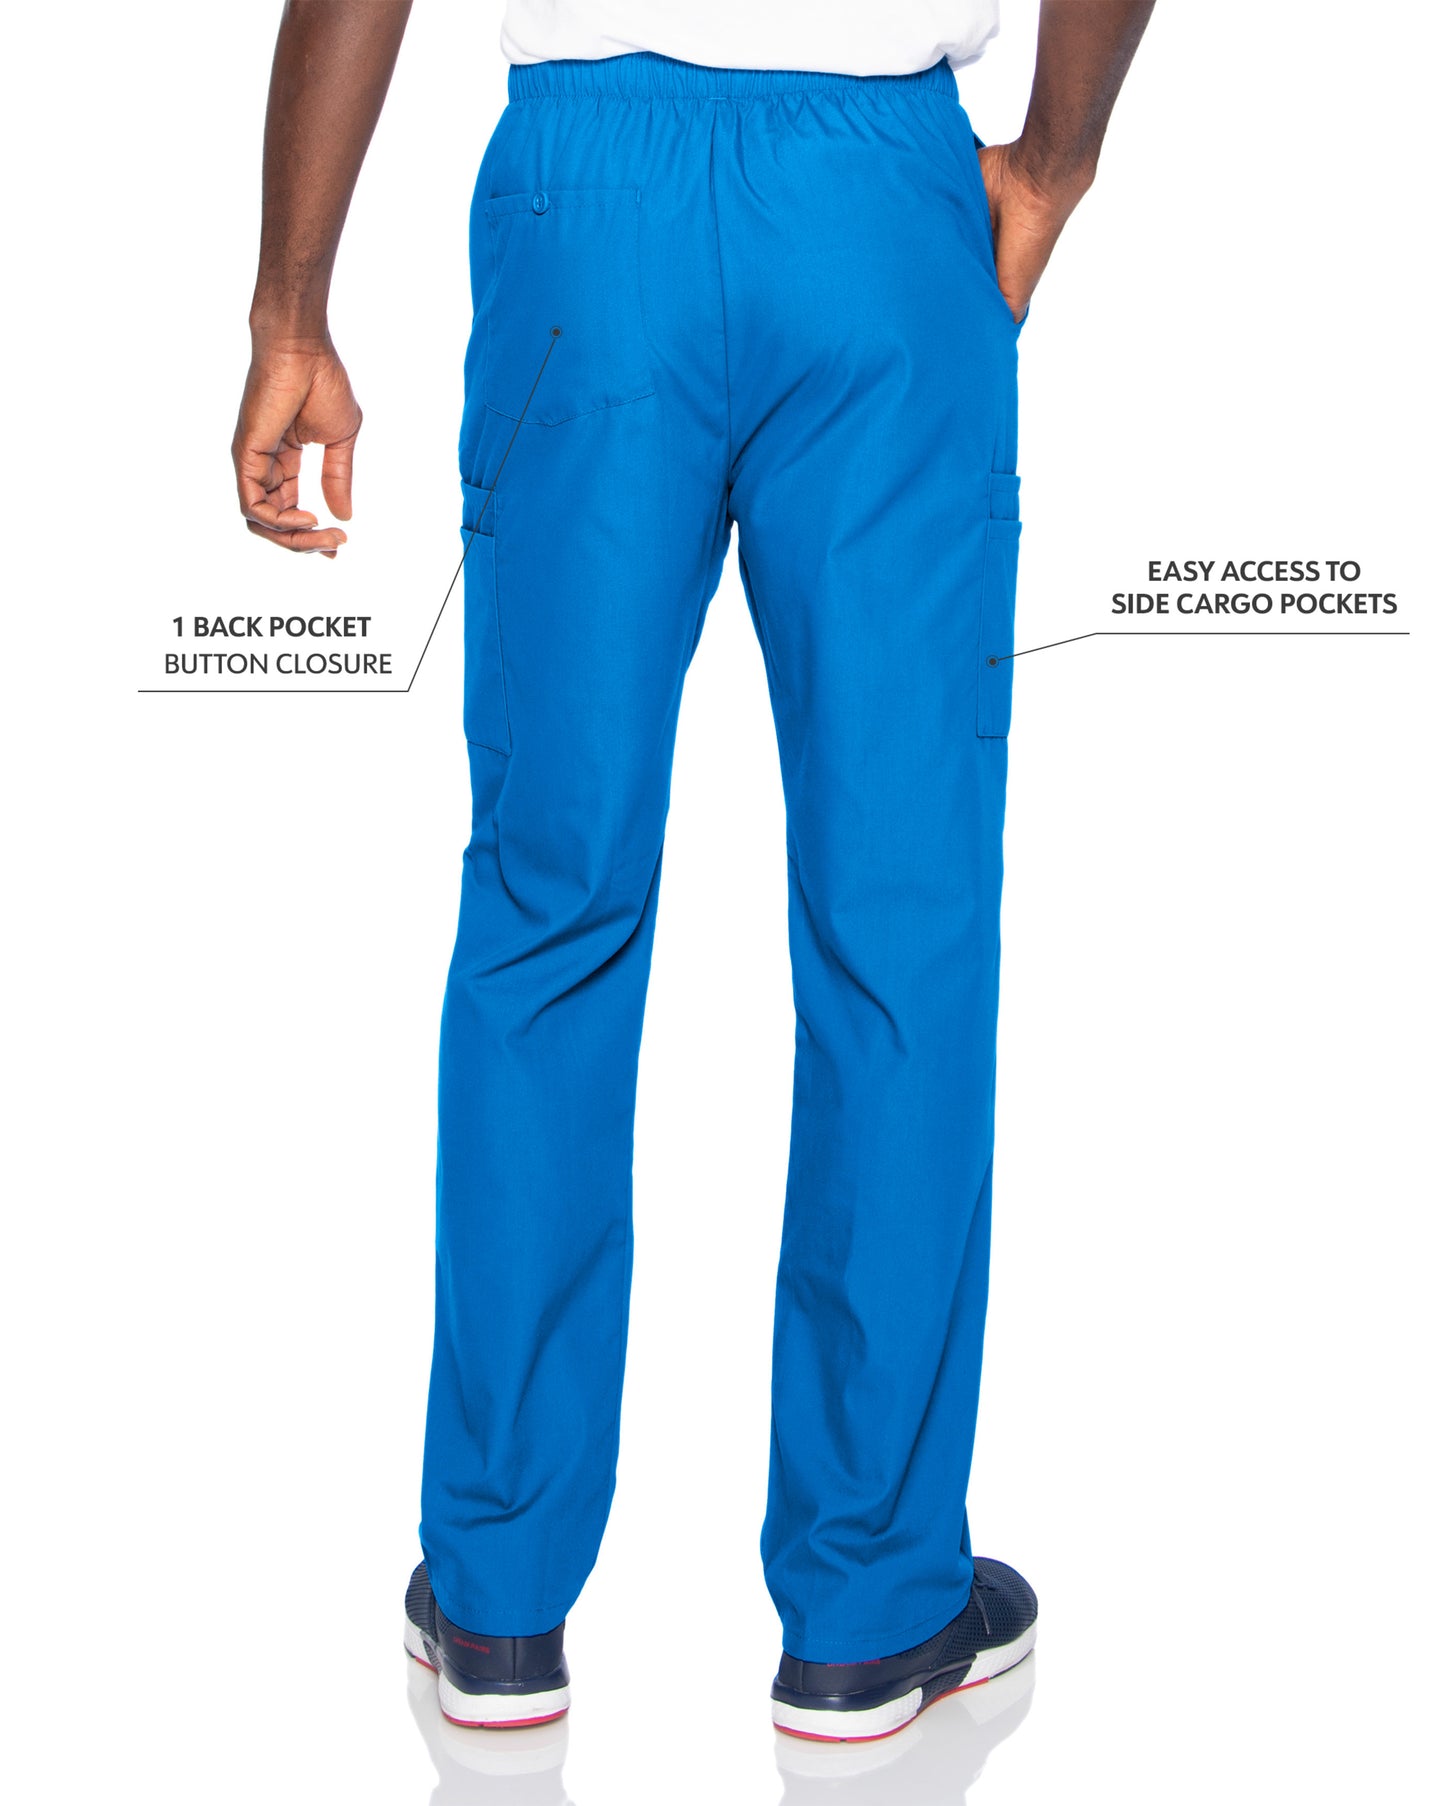 Men's Breathable Fabric Pant